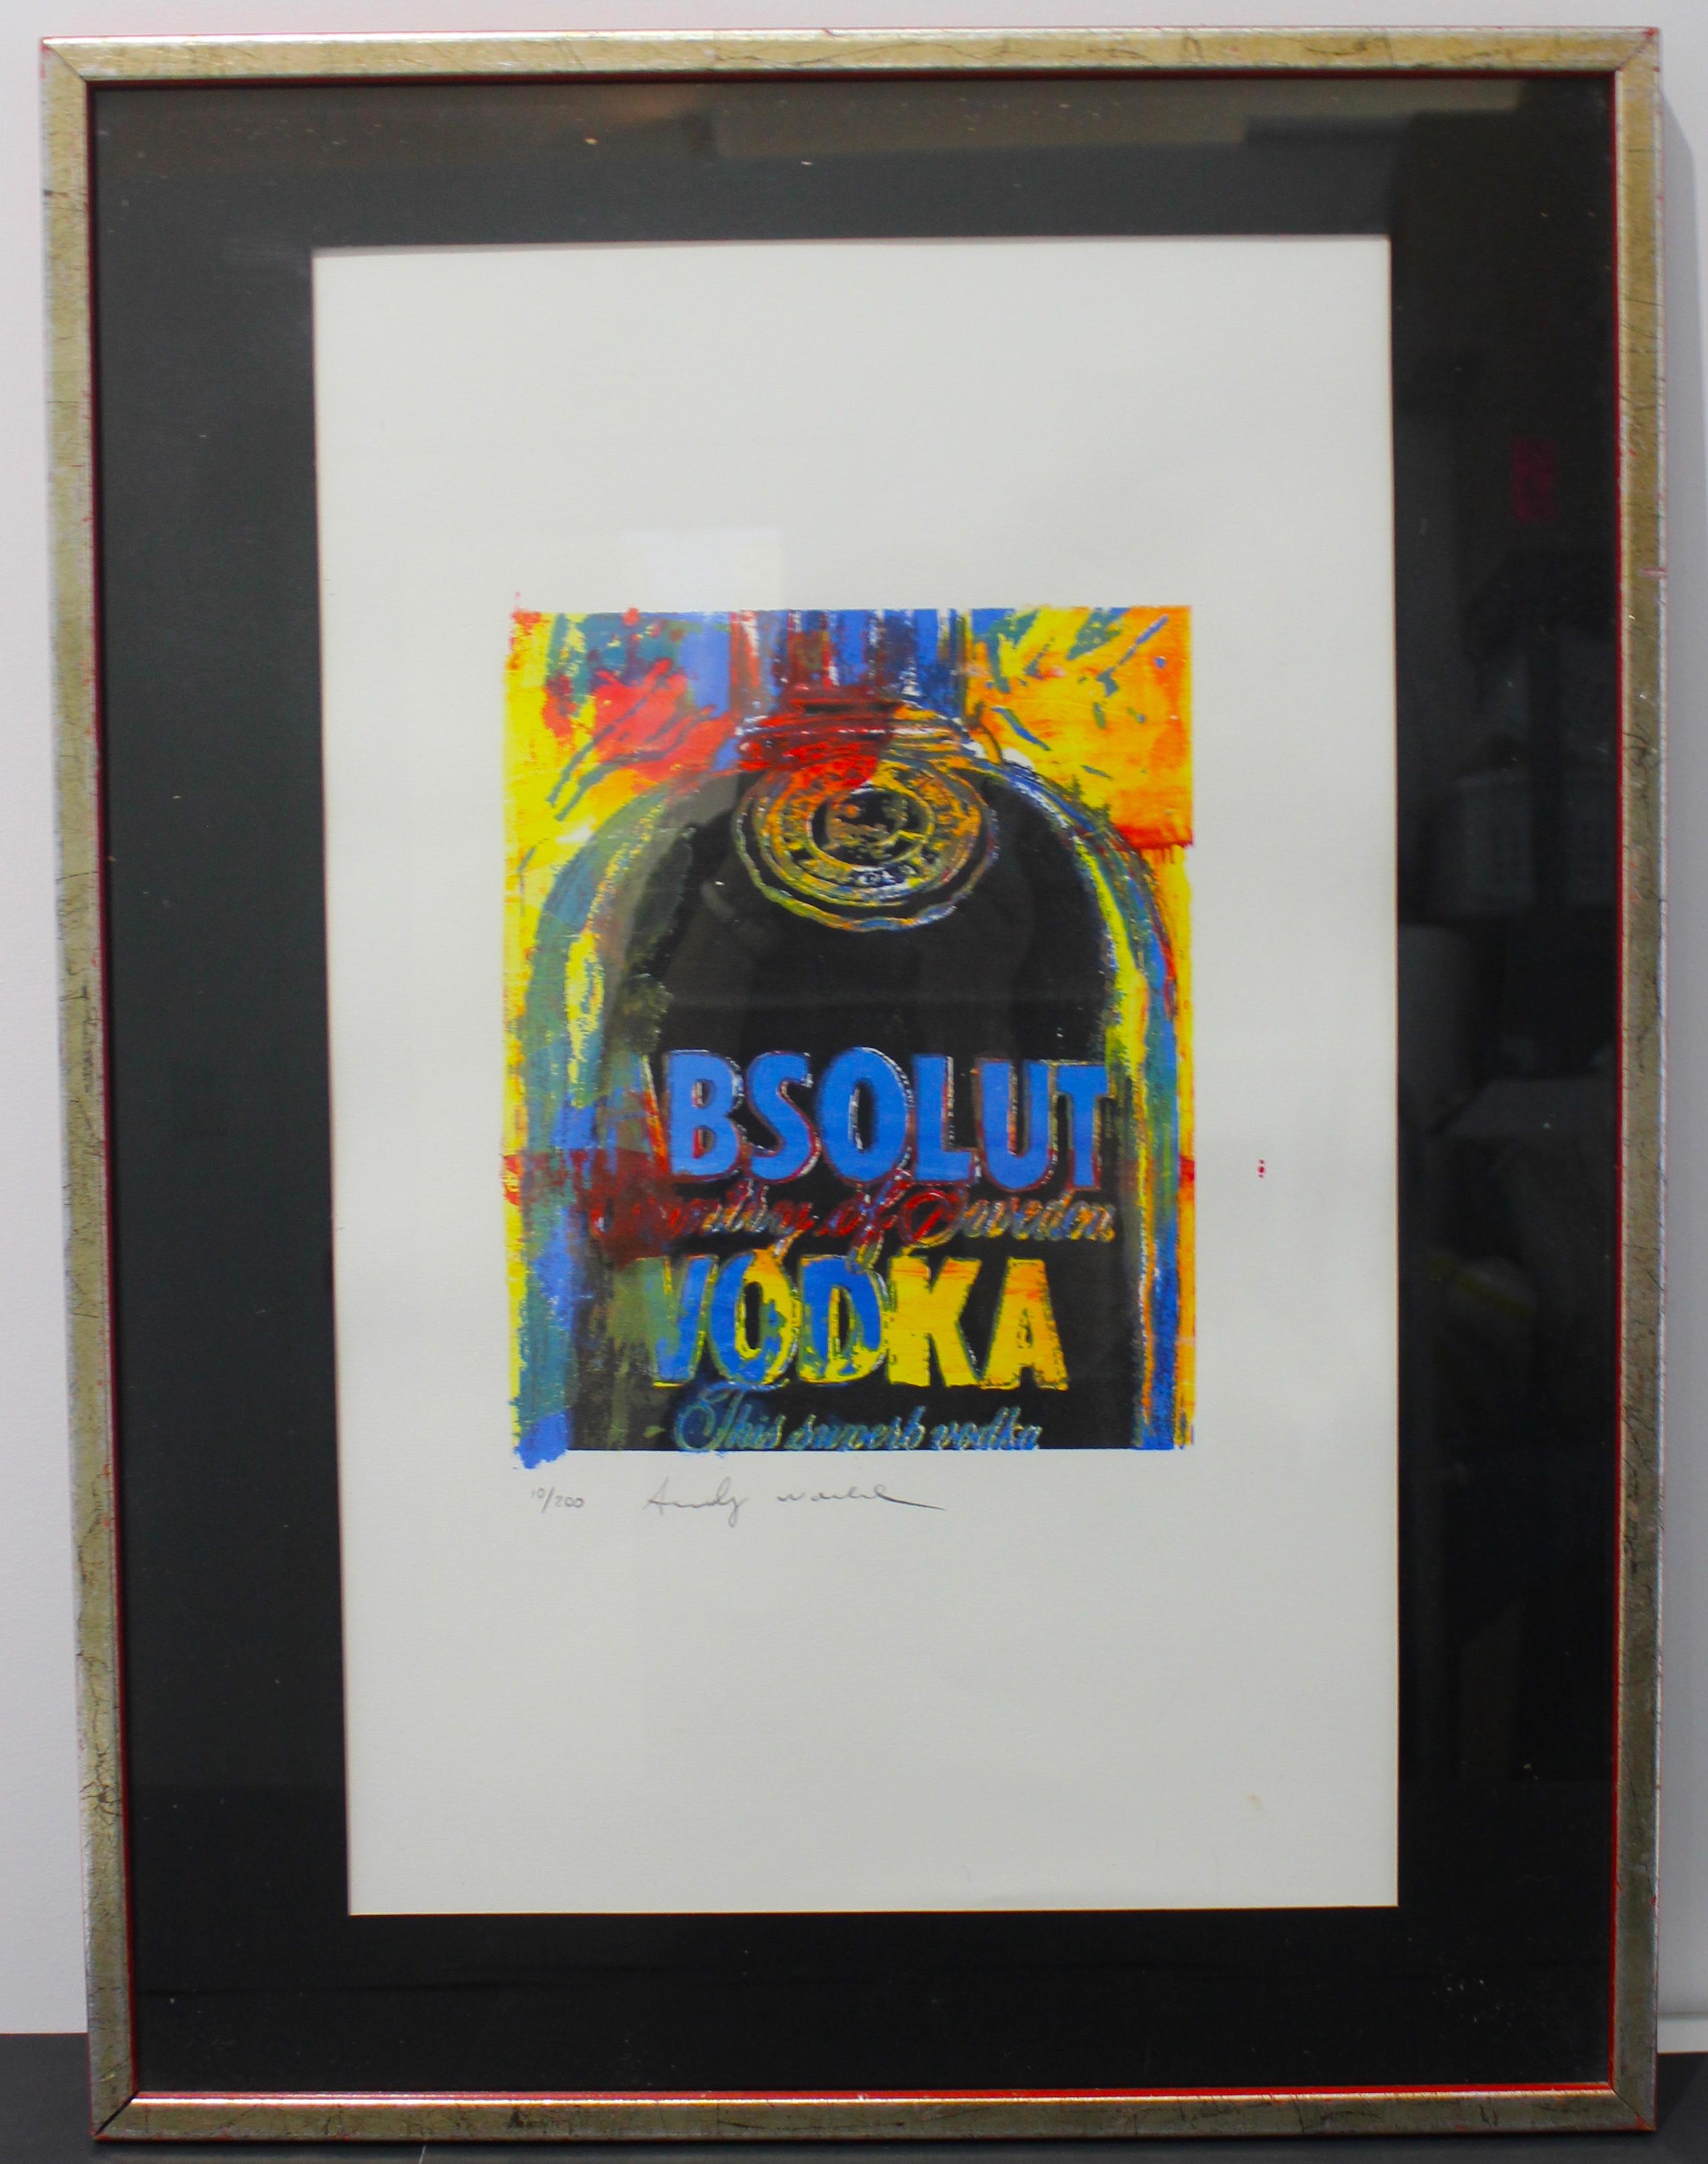 This stylish and iconic limited edition lithograph of an Absolute Vodka bottle was created by Andy Warhol in 1986.

The piece is signed and numbered 10/200 in pencil.